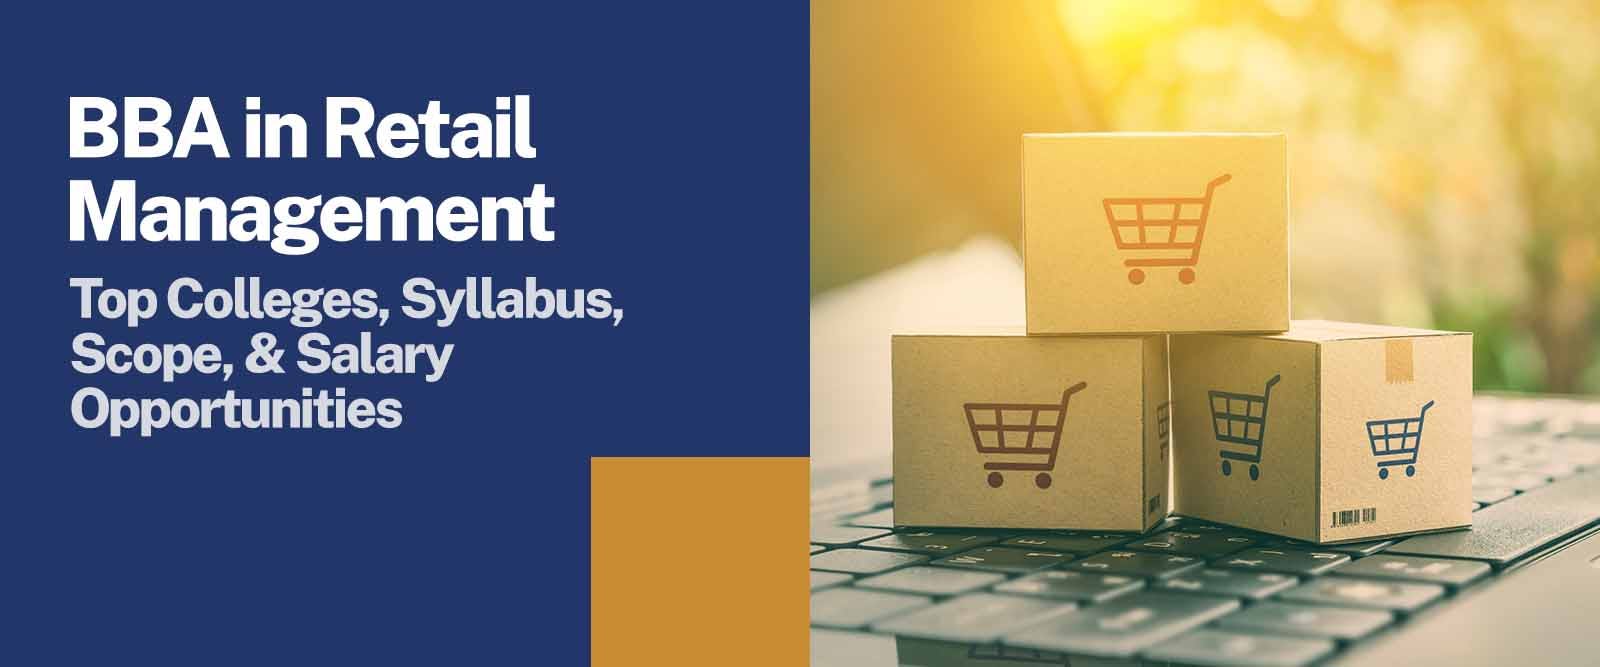 BBA in Retail Management: Course Syllabus & Scope